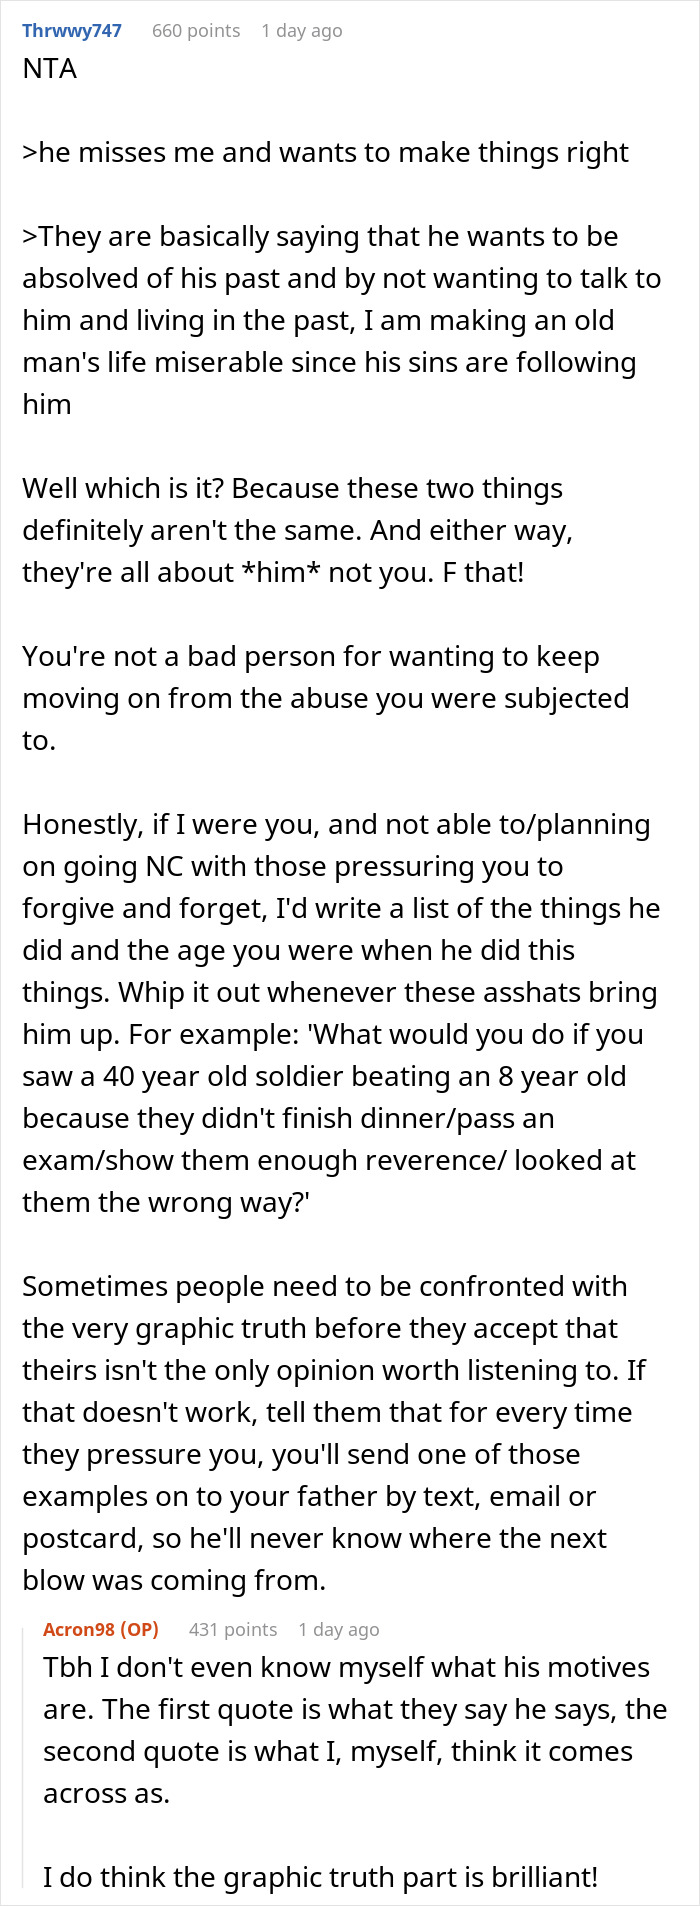 Dad Expects Kid To Forgive 20 Years Of Abuse Because He’s “Changed”, They Tell It Like It Is